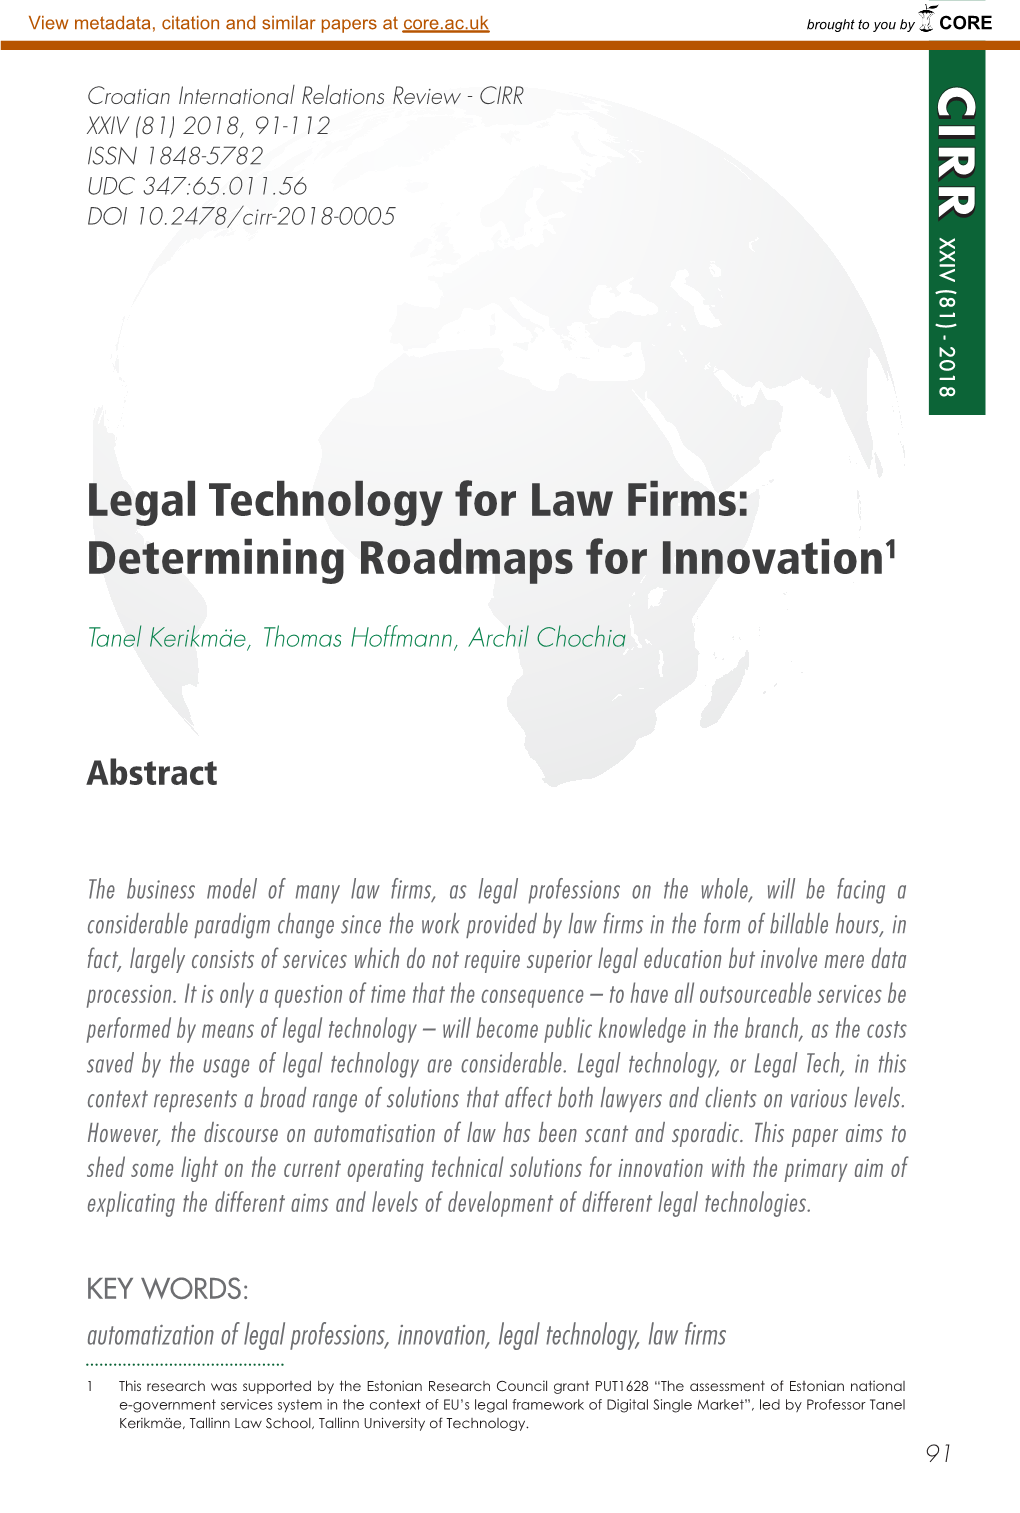 Legal Technology for Law Firms: Determining Roadmaps For